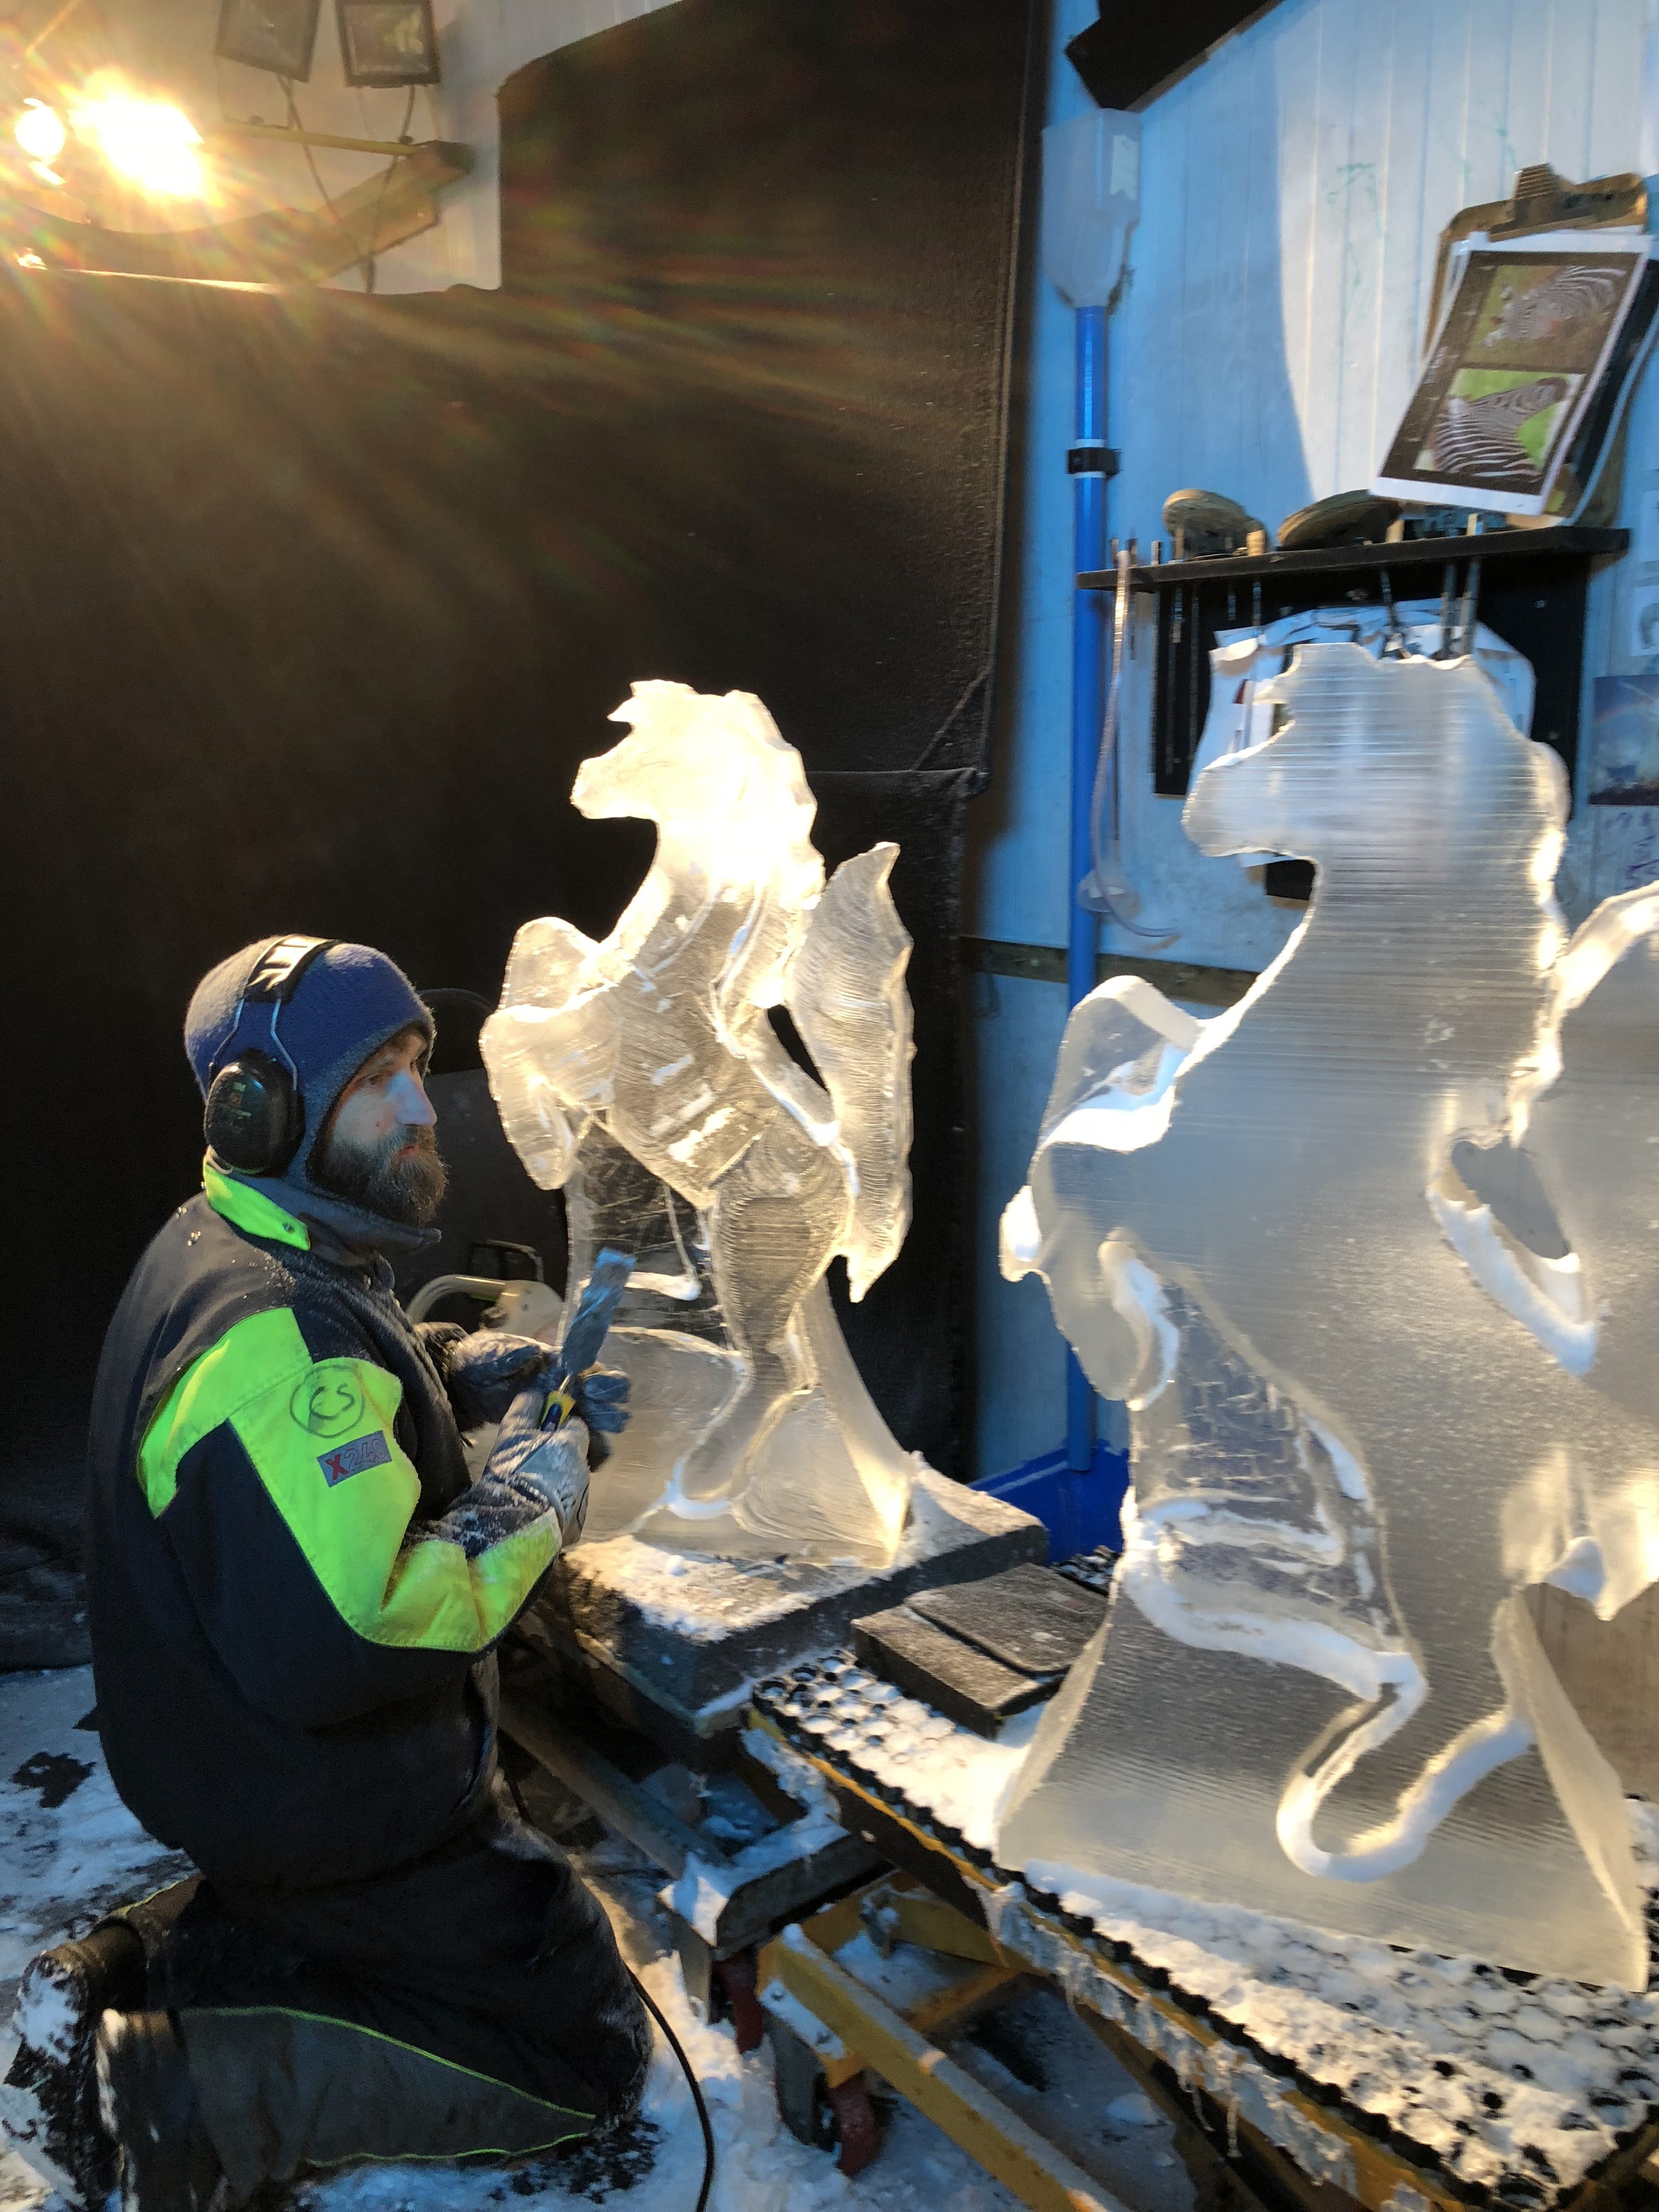 Carving an ice sculpture unicorn for LADBible